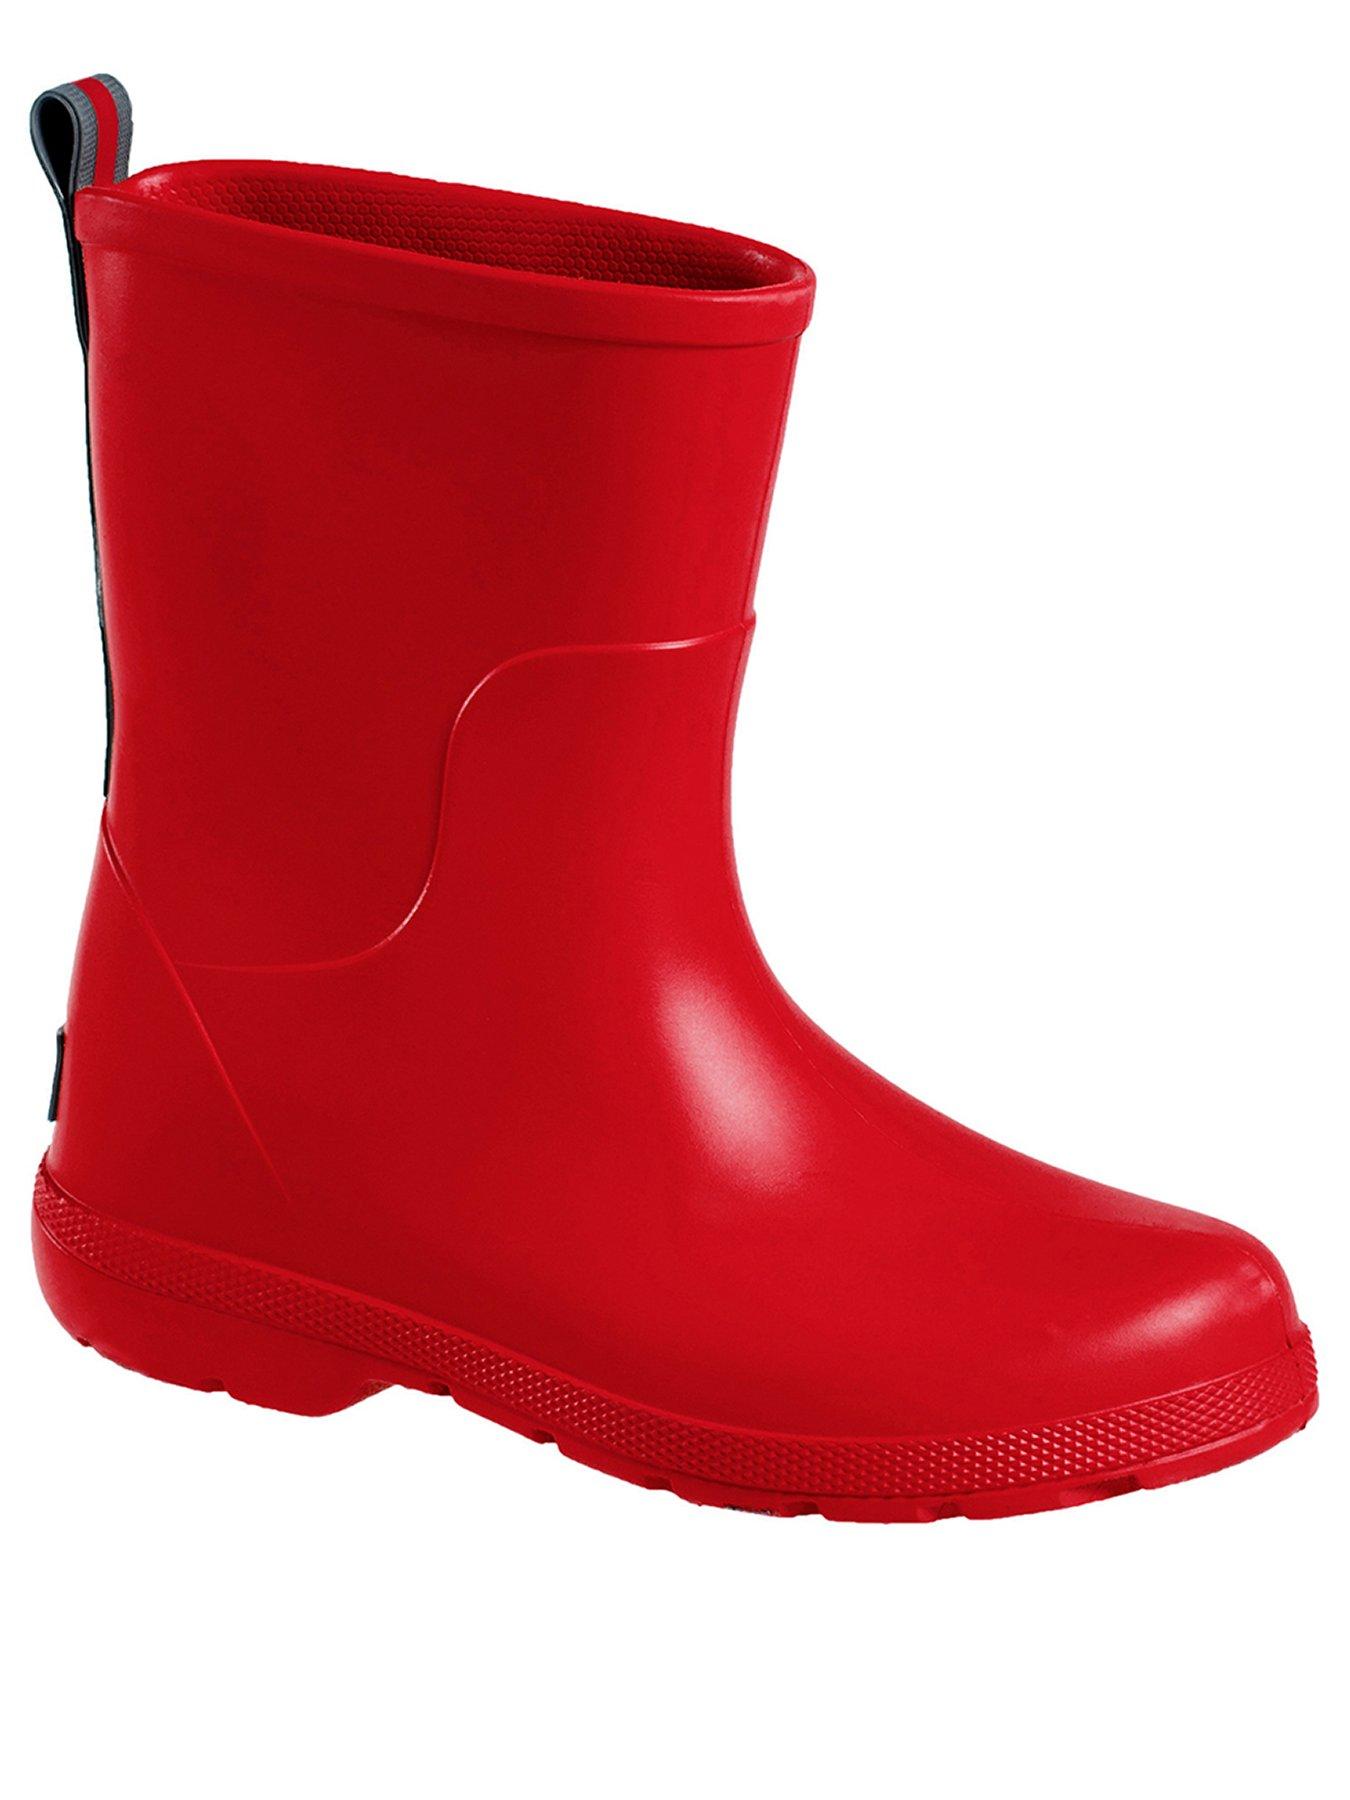 Shoes & boots Kids Charley Rain Boot - Red